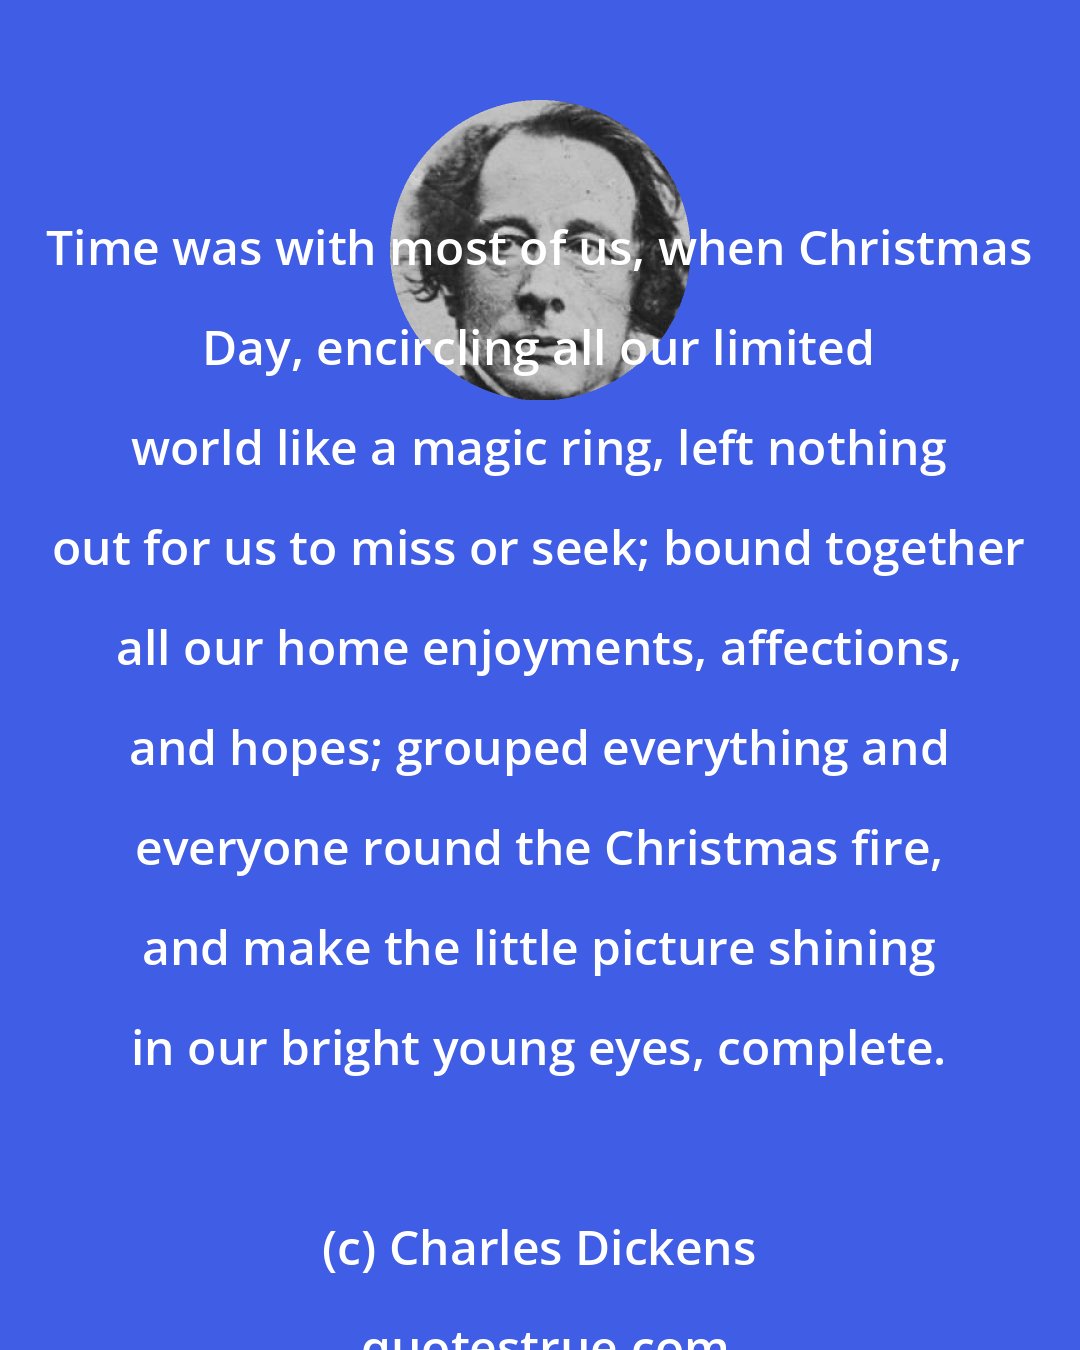 Charles Dickens: Time was with most of us, when Christmas Day, encircling all our limited world like a magic ring, left nothing out for us to miss or seek; bound together all our home enjoyments, affections, and hopes; grouped everything and everyone round the Christmas fire, and make the little picture shining in our bright young eyes, complete.